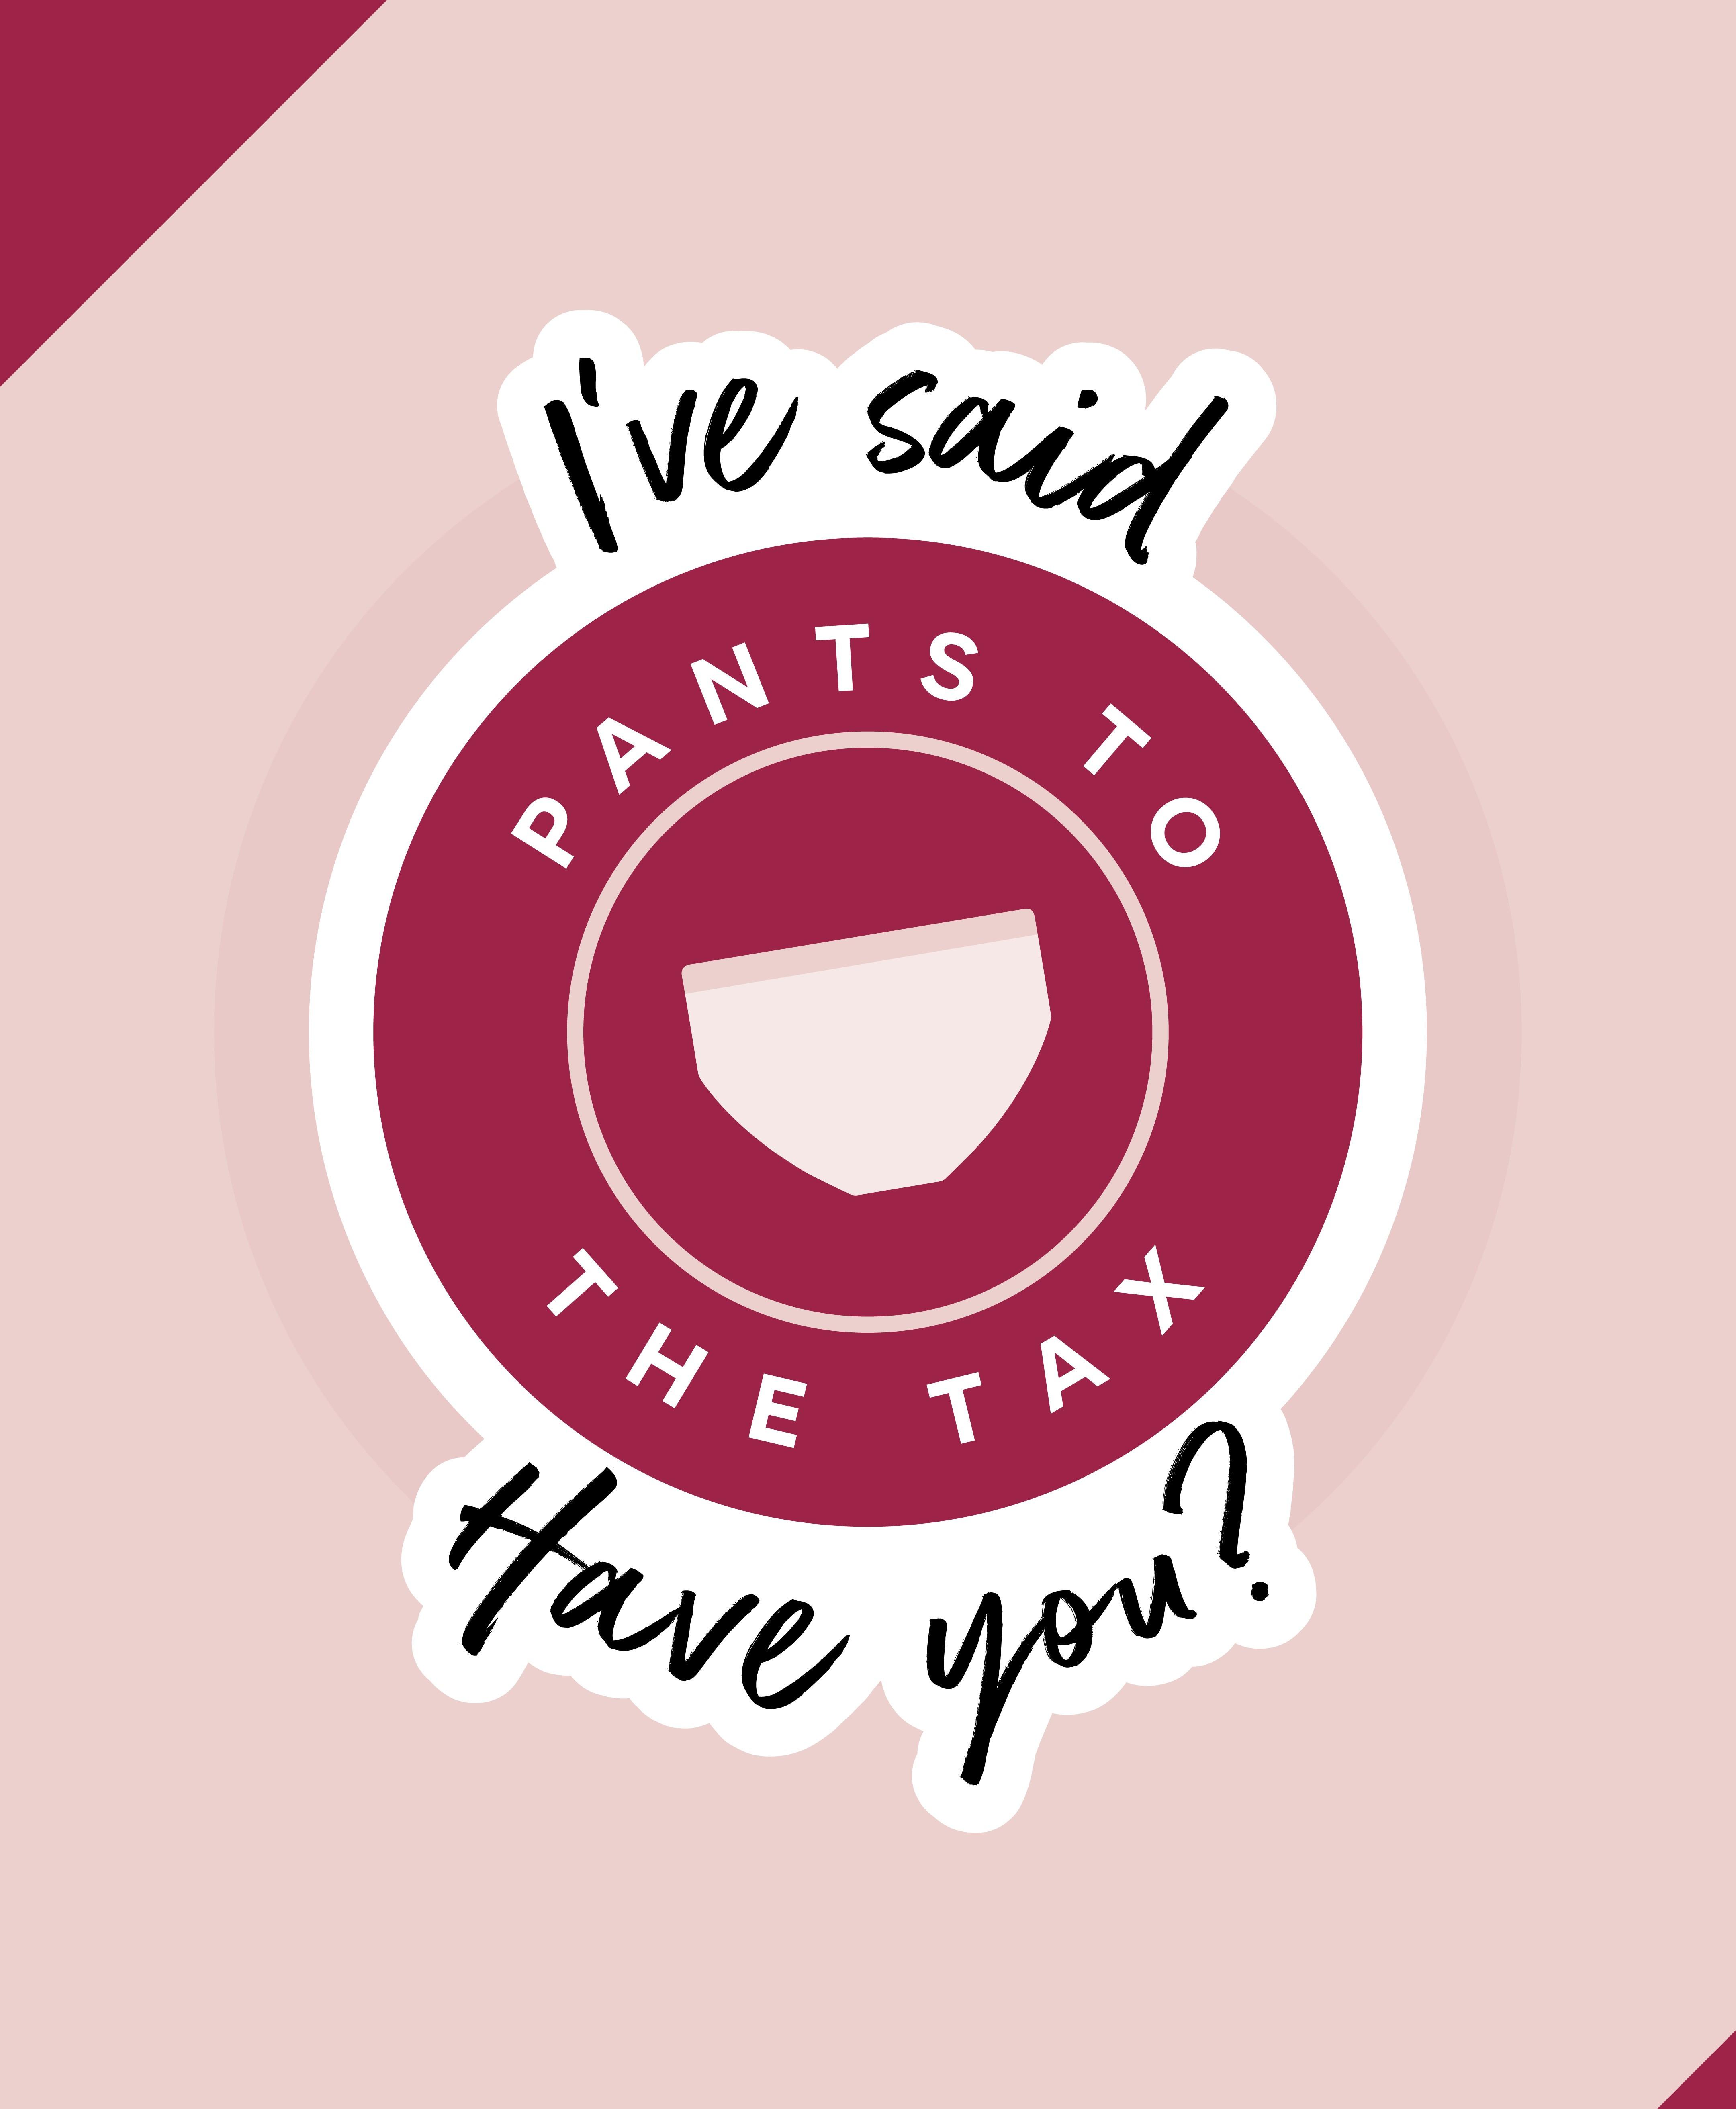 Say pants to the tax